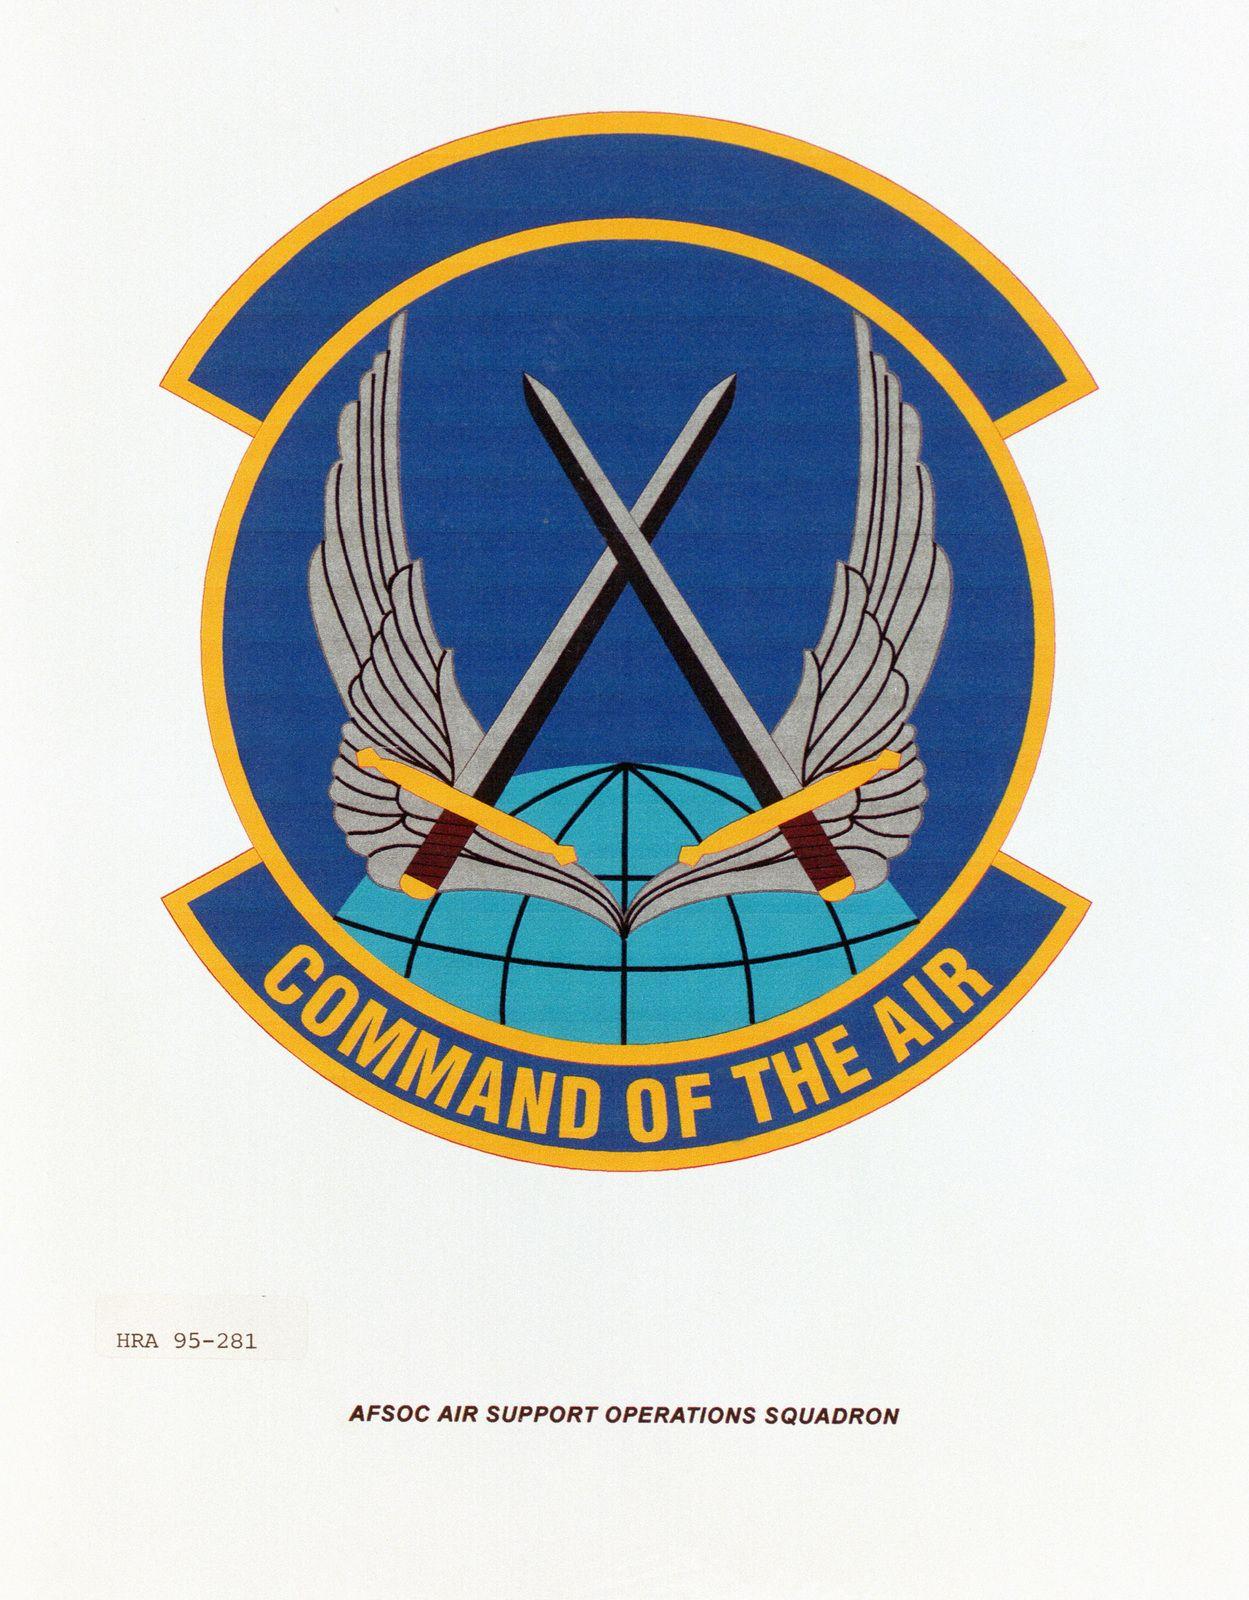 AFSOC Logo - Approved insignia for the AFSOC Air Support Operations Squadron